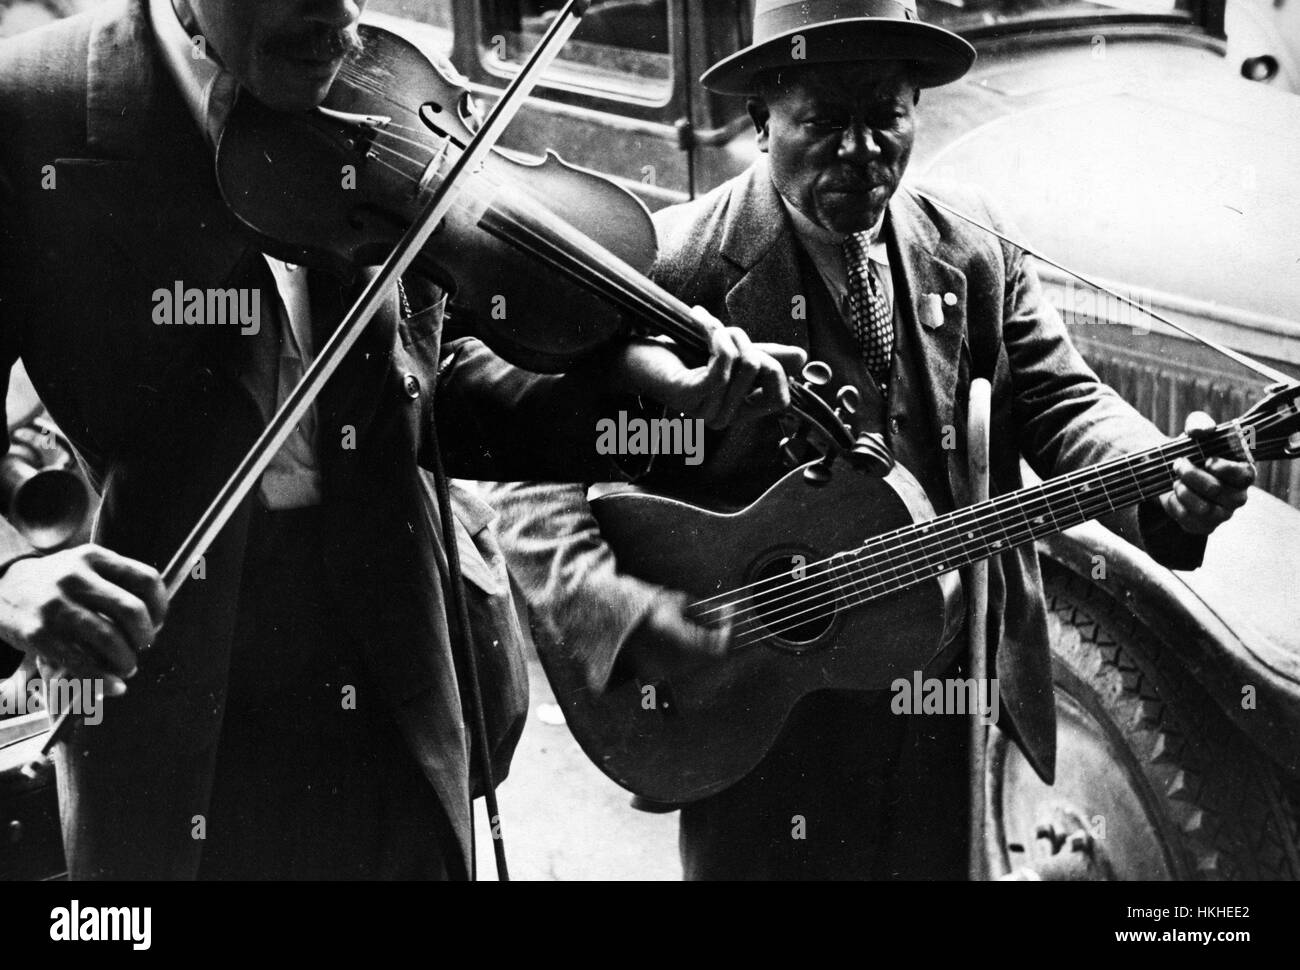 Black and white photograph of two African-American men, street musicians, one playing the violin, the other a guitar, by Walker Evans, American photographer best known for his work for the Farm Security Administration documenting the effects of the Great Depression, West Memphis, Arkansas, 1935. From the New York Public Library. Stock Photo